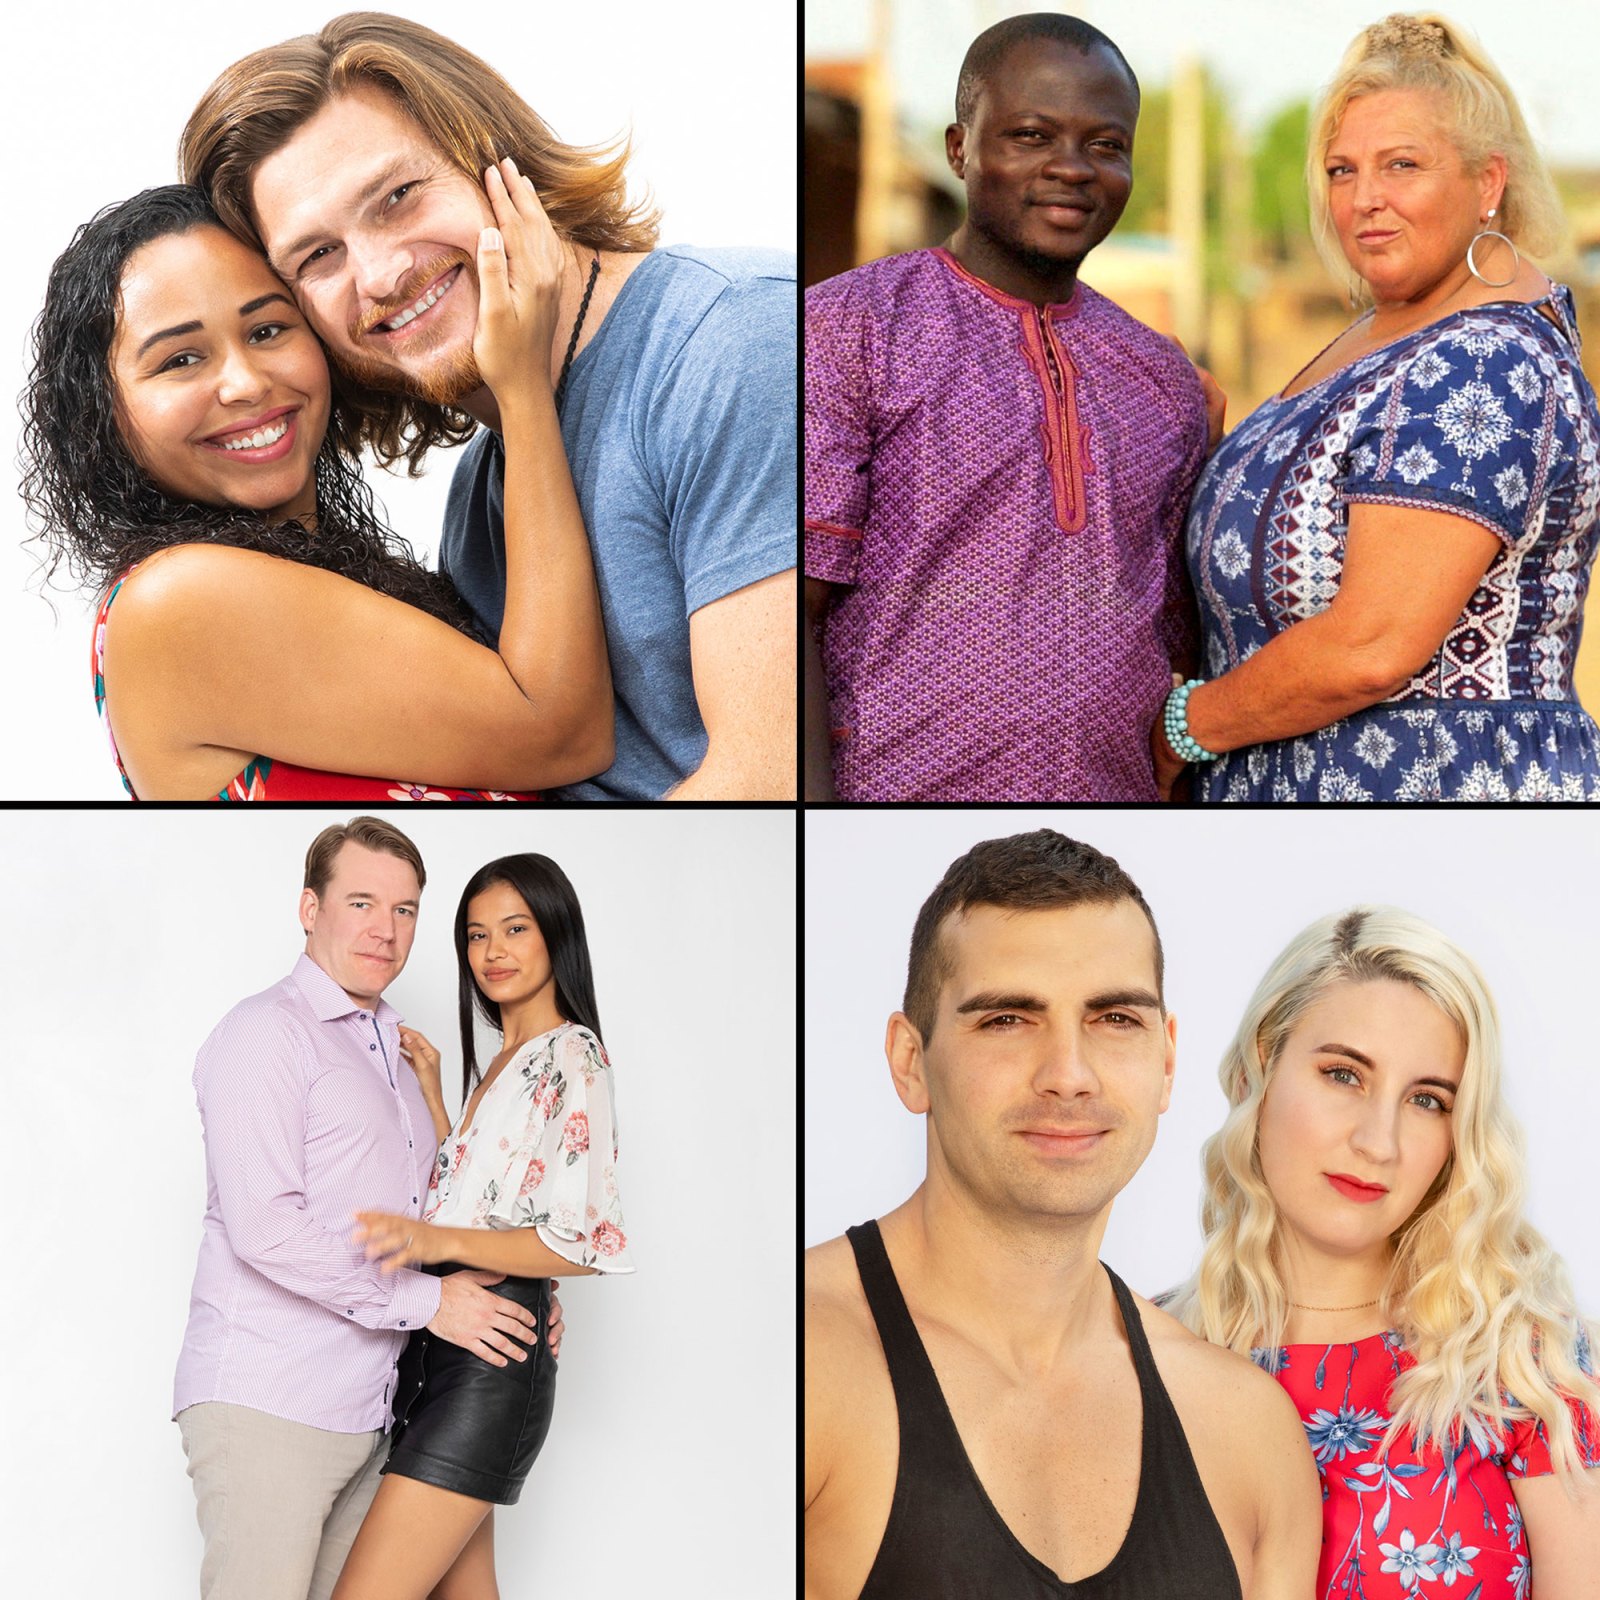 90 Day Fiance' Season 7 Tell-All: Who Is Still Together?